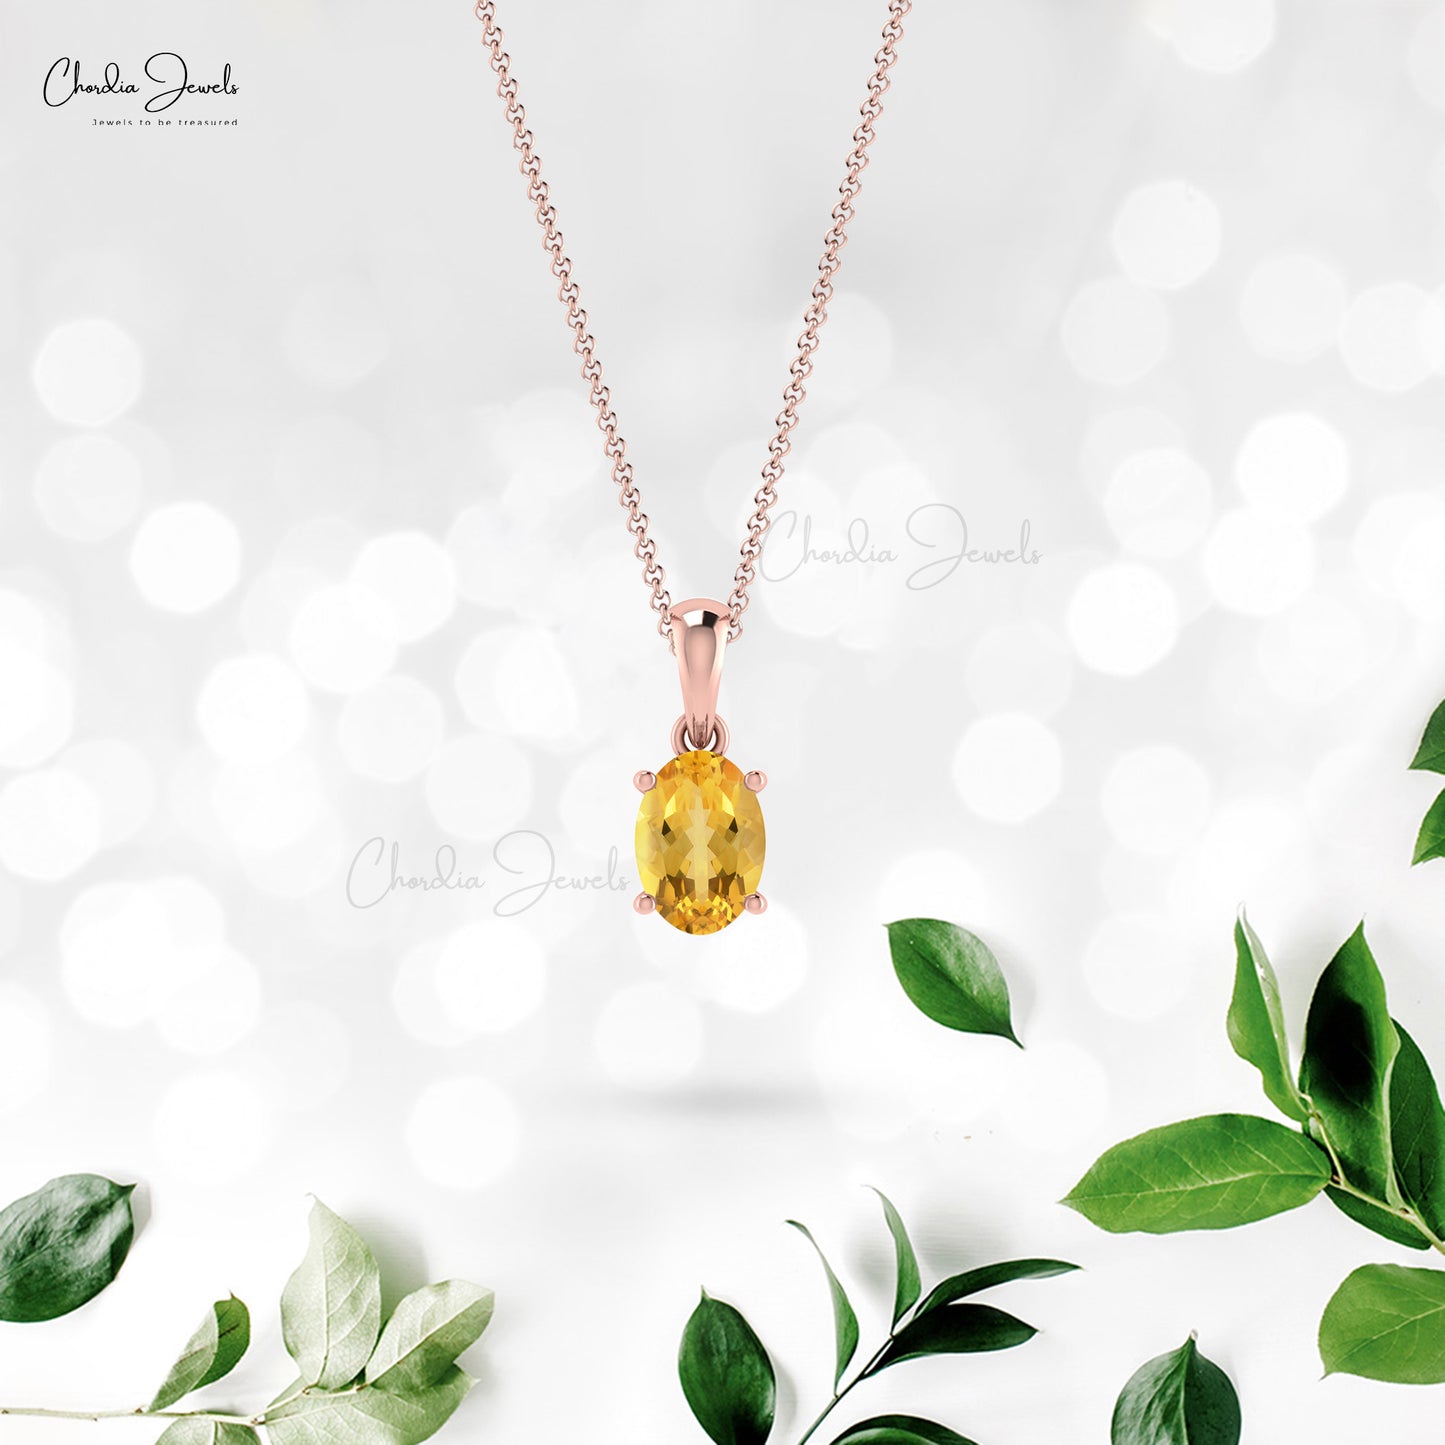 Load image into Gallery viewer, Natural 0.42ct Citrine Gemstone Pendant 14k Solid Gold Chain Pendant For Birthday Gift
